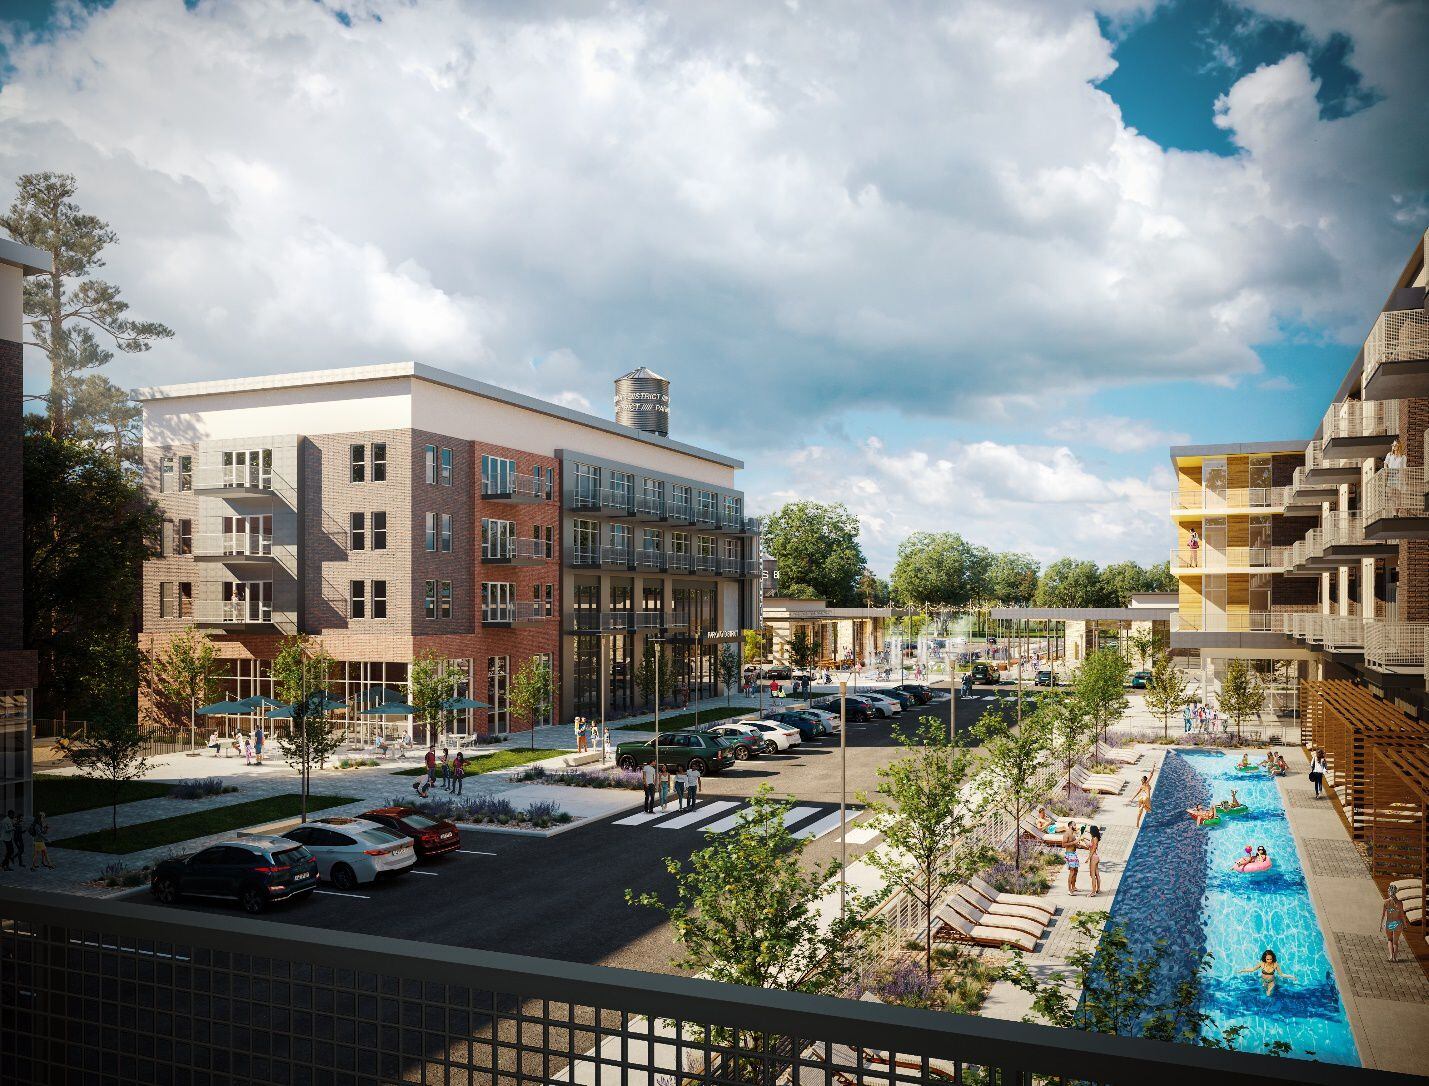 Realty Capital Management plans to start construction this summer on a mixed-use development...